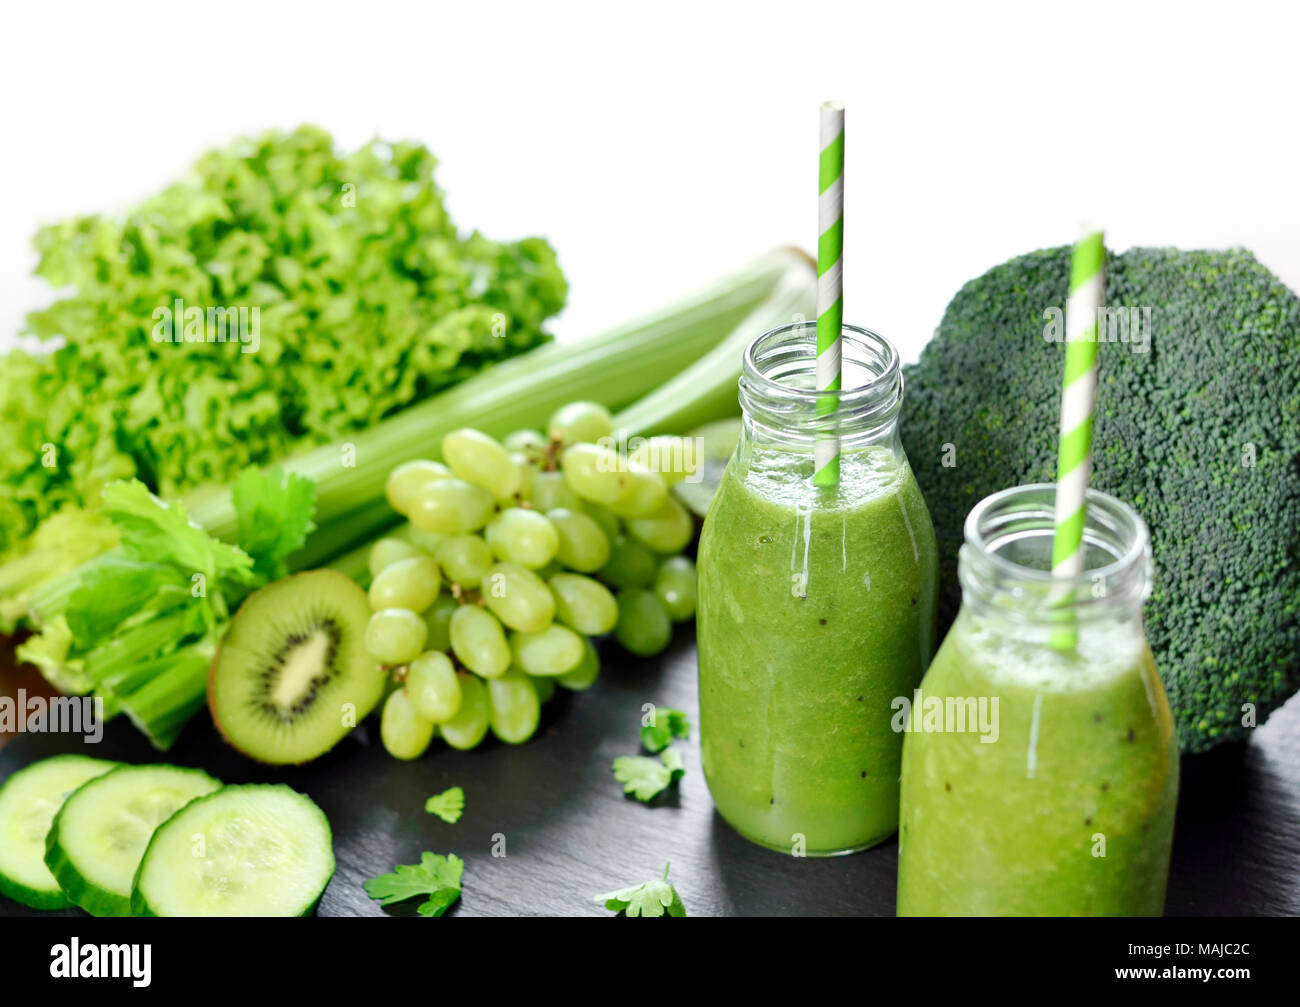 Green smoothie in drinking glasses. Fitness or dieting drink with kiwi, broccoli, lettuce and various ingredients. Healthy drink in a glass bottle. Stock Photo